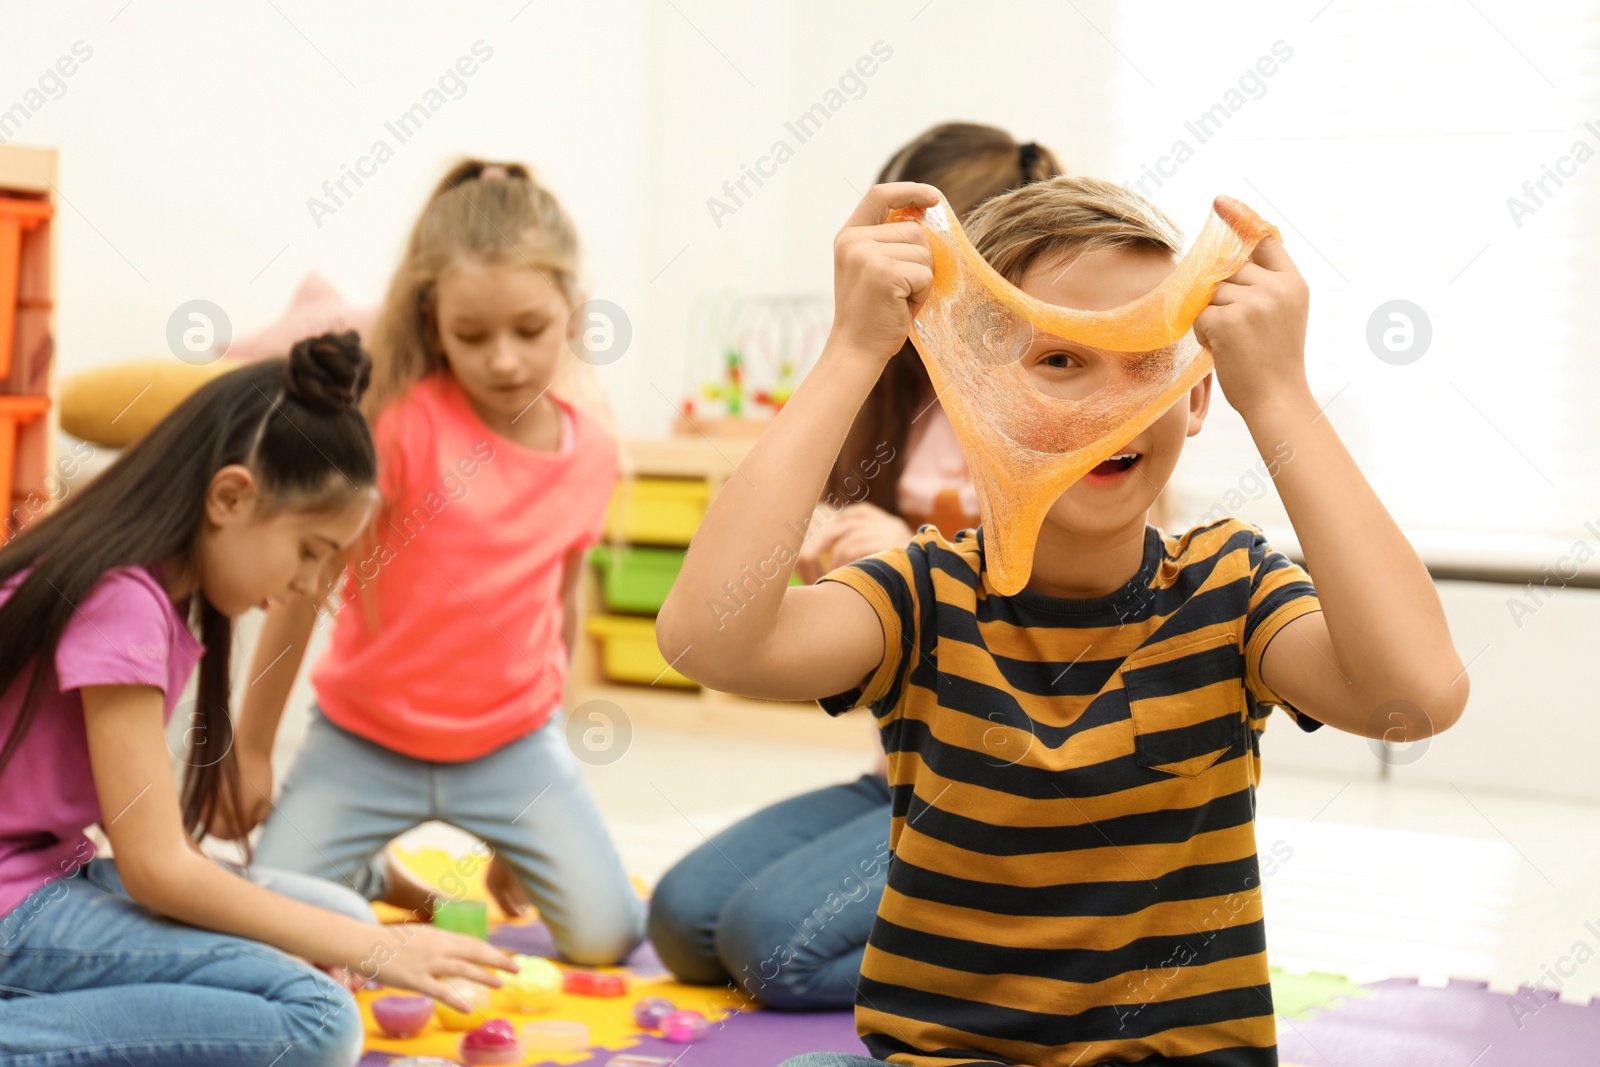 Photo of Preteen boy playing with slime in room